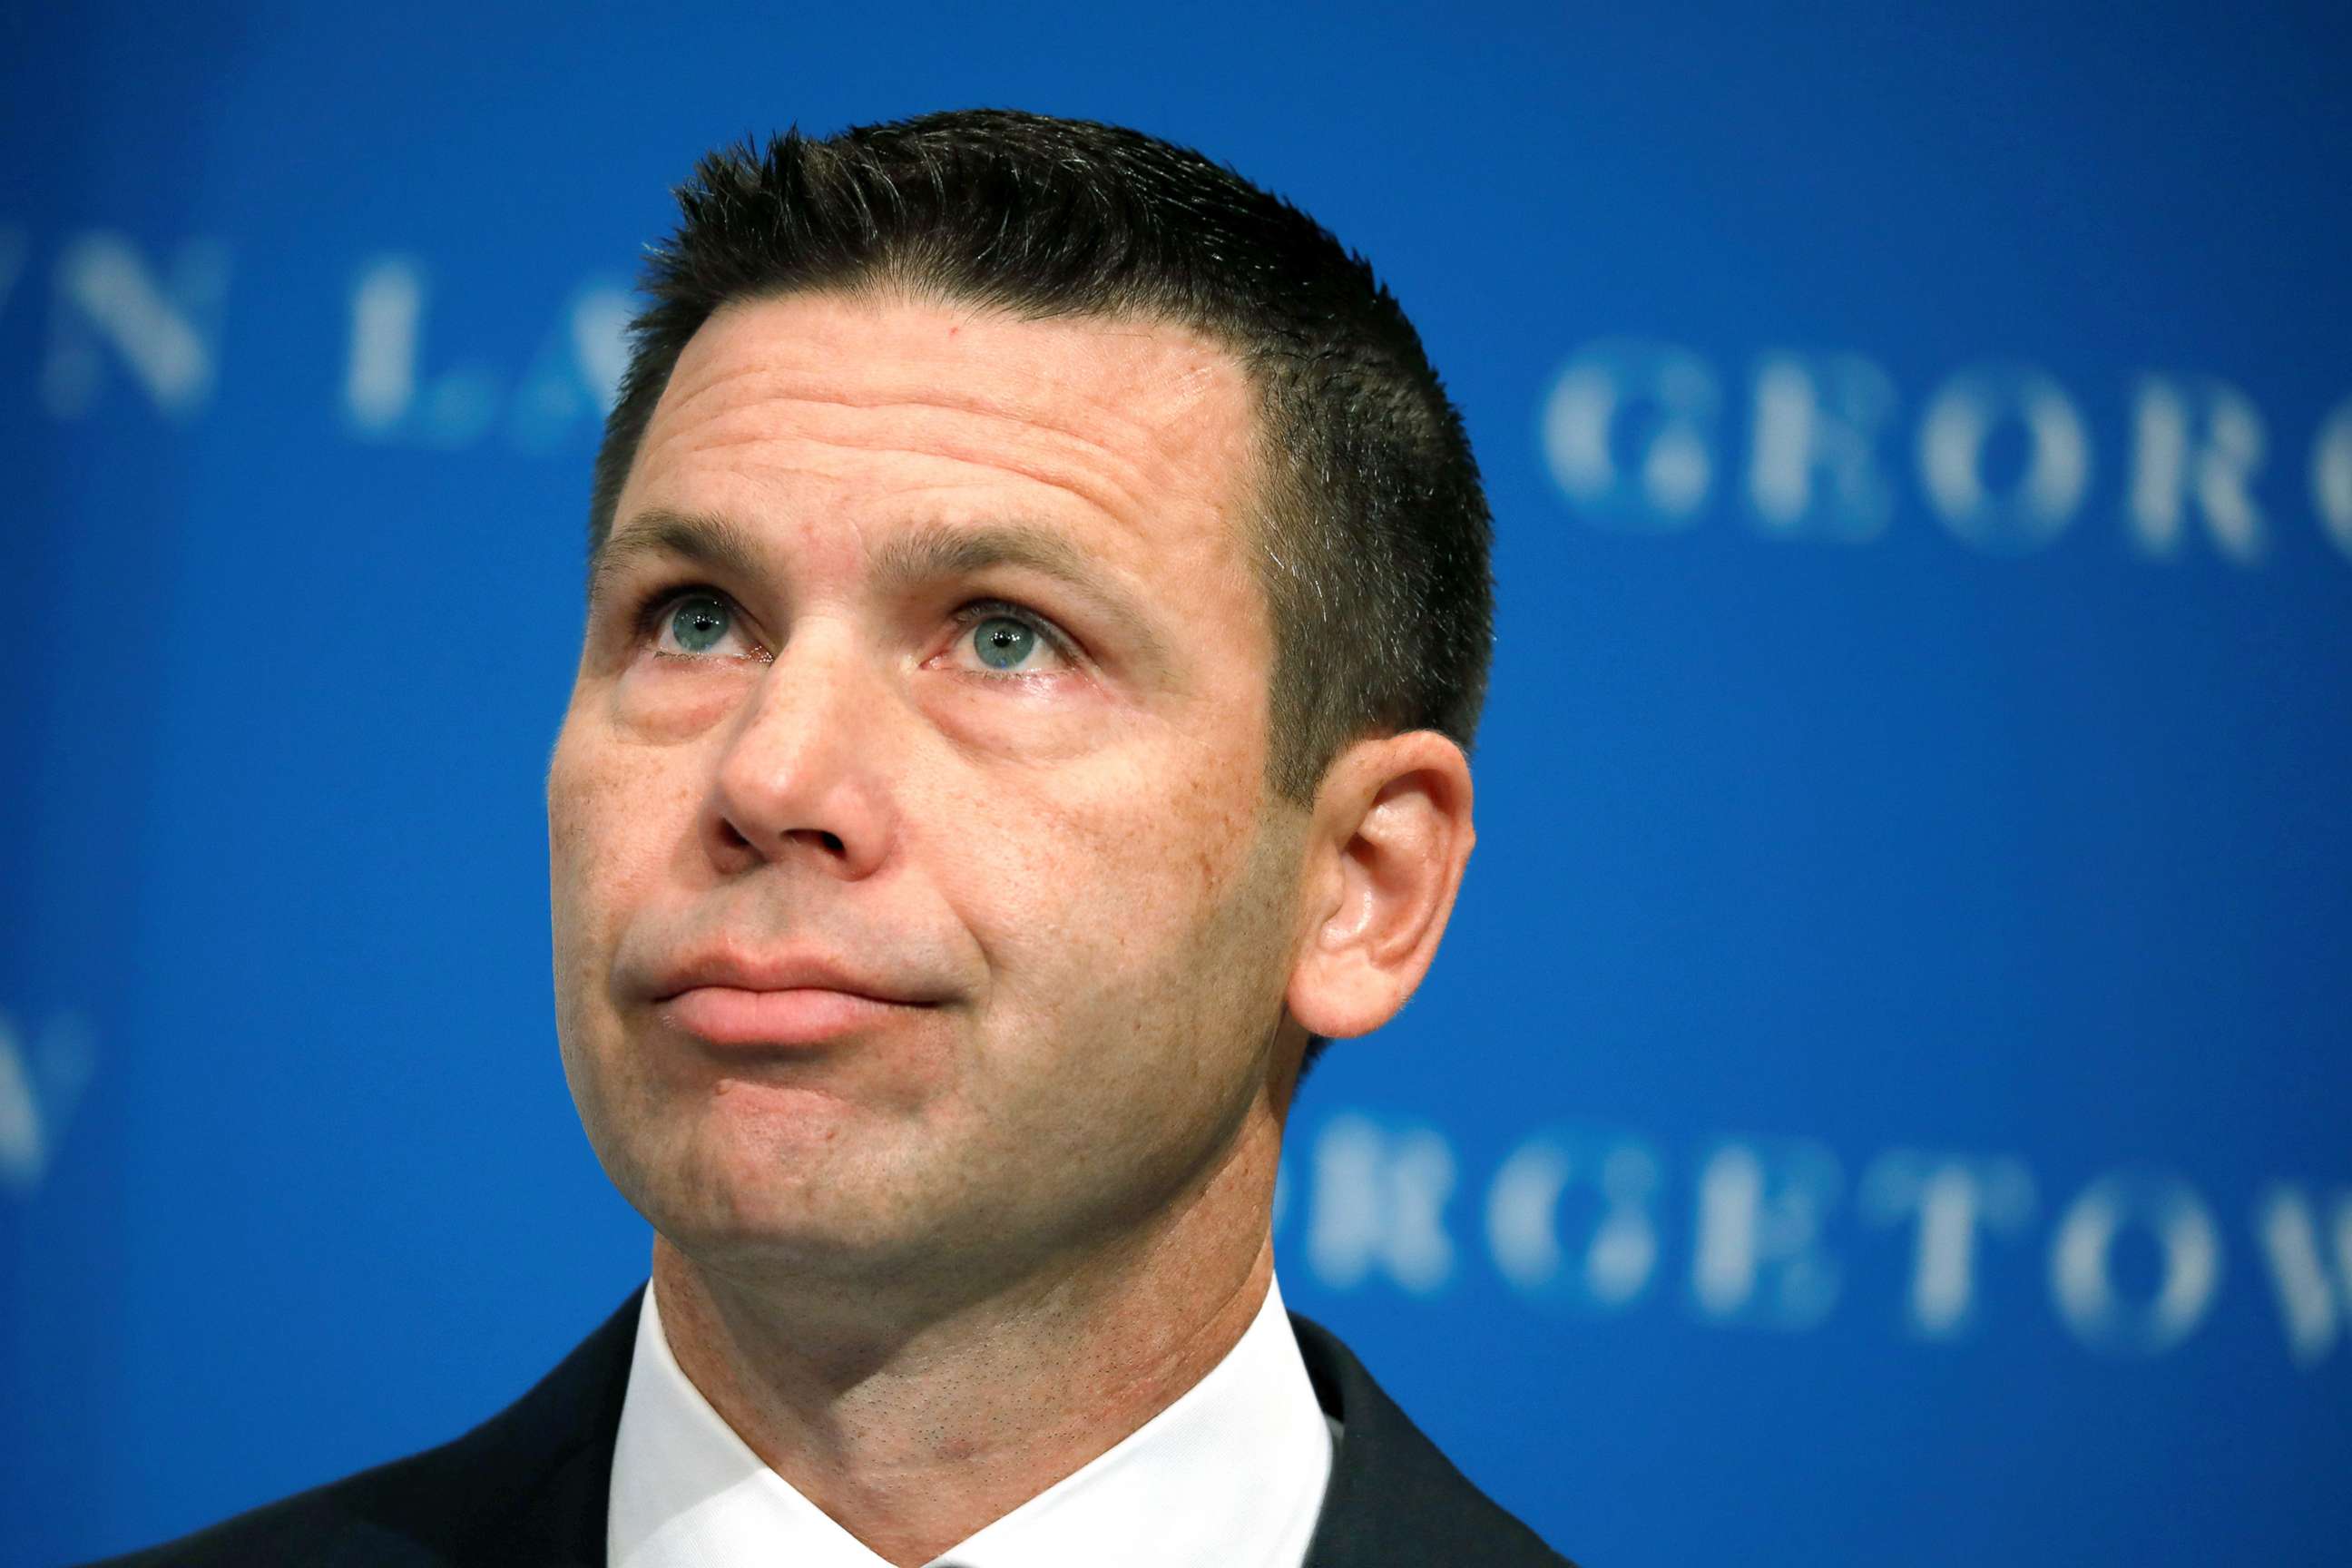 PHOTO: Acting Department of Homeland Security (DHS) Secretary Kevin McAleenan reacts while demonstrators interrupt his remarks at the Migration Policy Institute annual Immigration Law and Policy Conference in Washington D.C., Oct. 7, 2019.